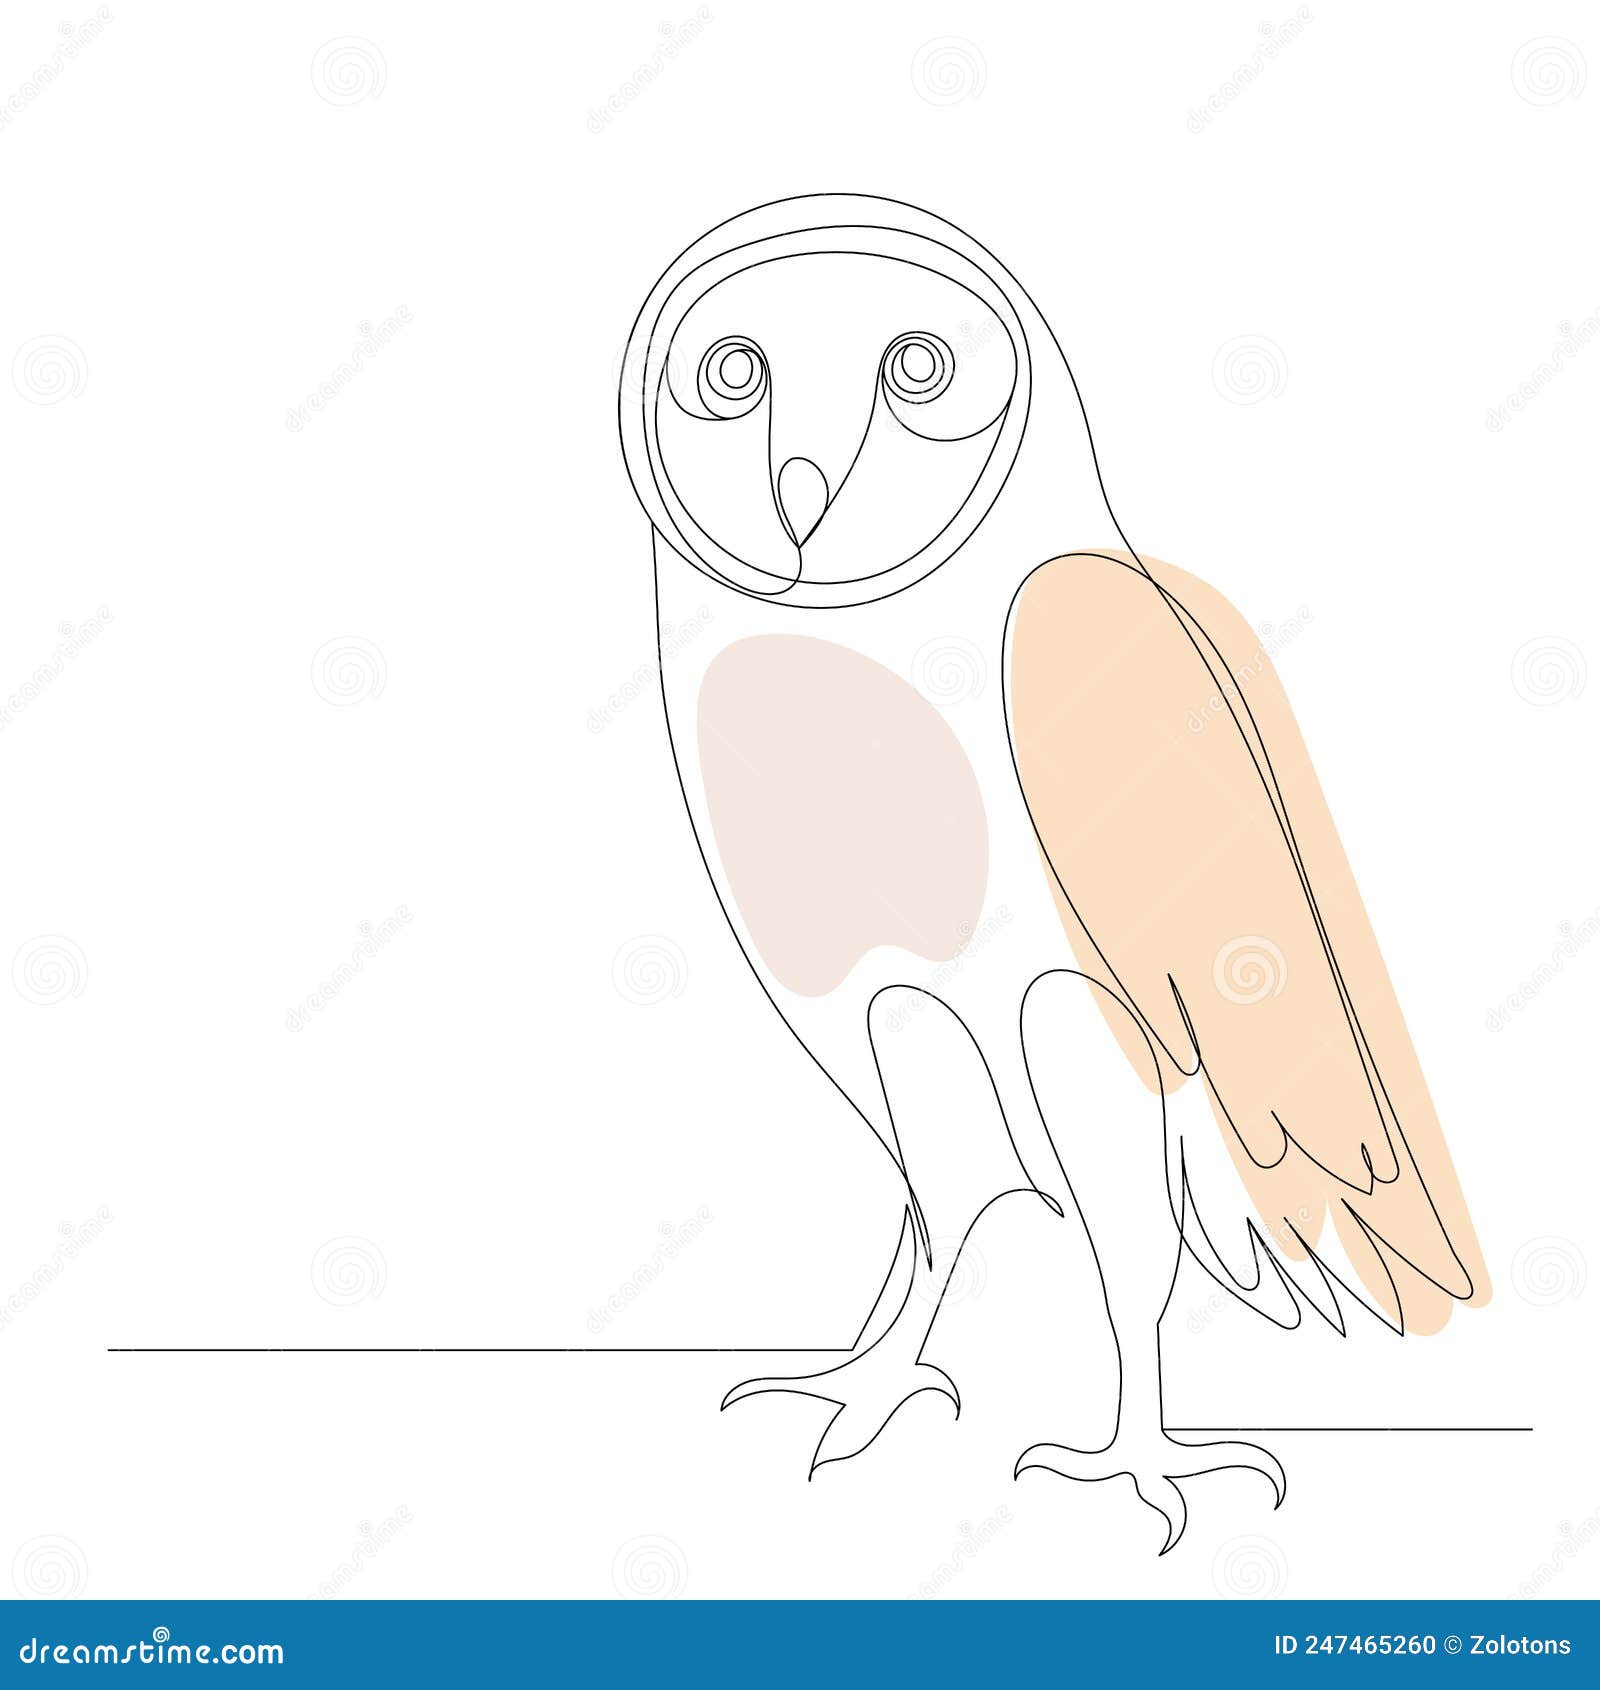 Drawing an Owl step by step - simple owl drawing - Smart Kids 123